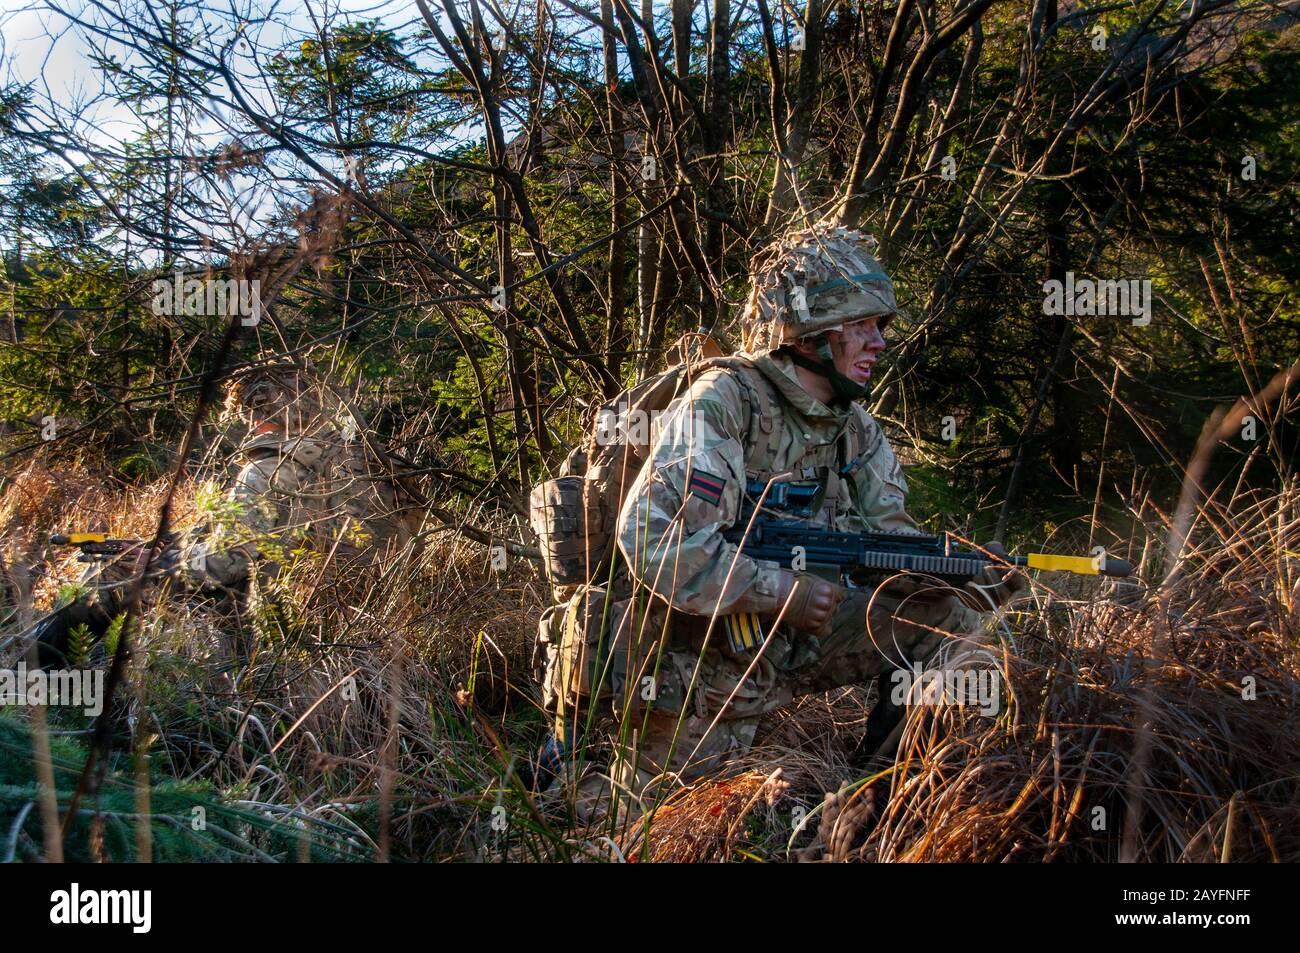 British Army troops from the 3rd Battalion, The Rifles on a training exercise on Kirkcudbright Training Area, Dumfries and Galloway southwest Scotland Stock Photo